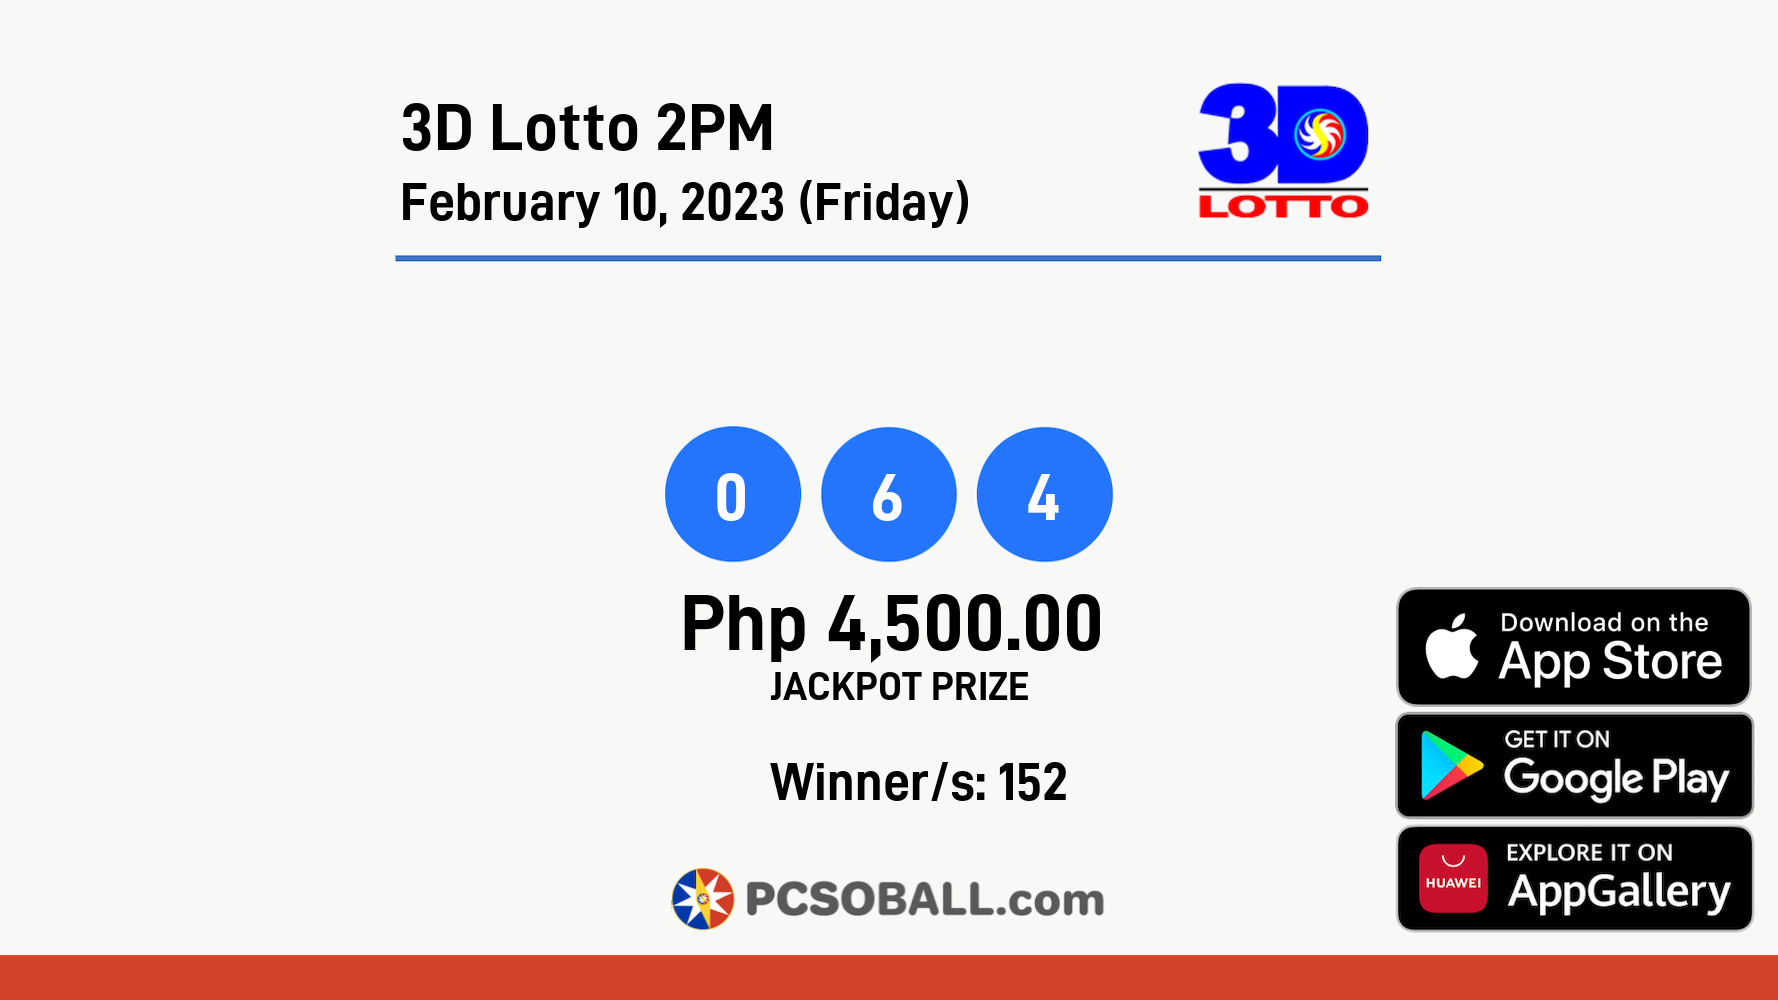 3D Lotto 2PM February 10, 2023 (Friday) Result